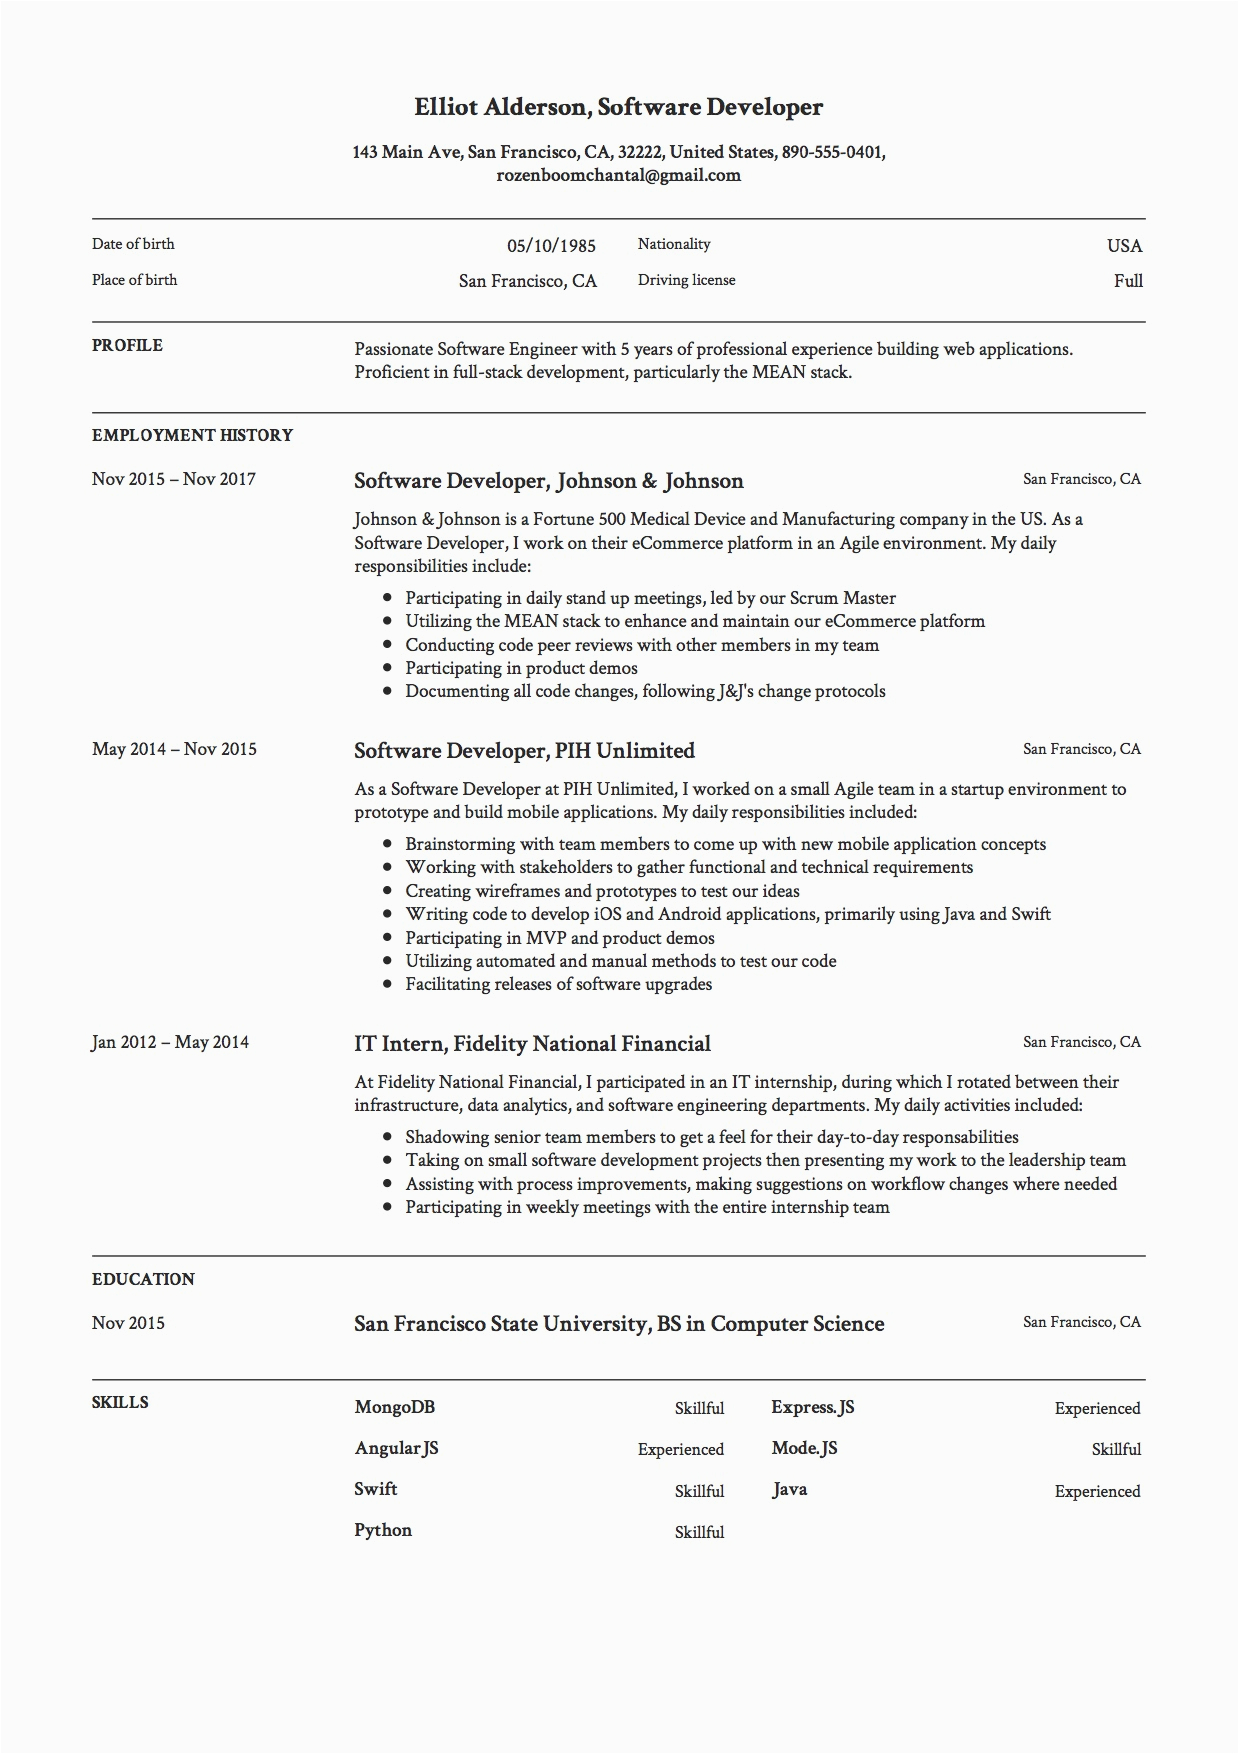 Sample Resume format for Experienced software Developer Guide software Developer Resume [ 12 Samples]